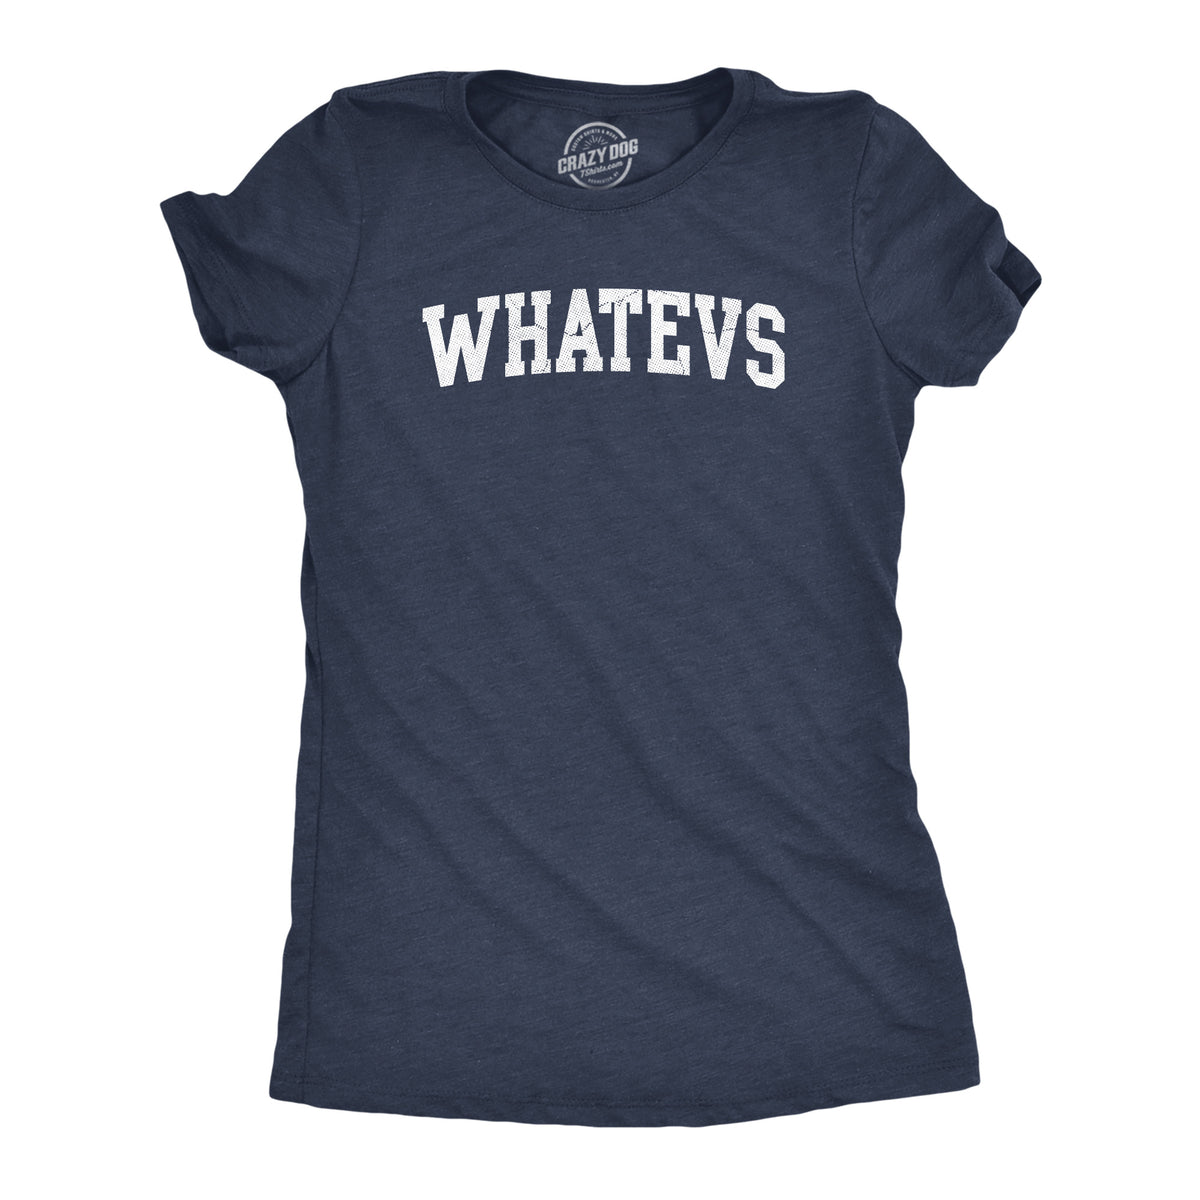 Funny Heather Navy - WHATEVS Whatevs Womens T Shirt Nerdy Sarcastic Tee